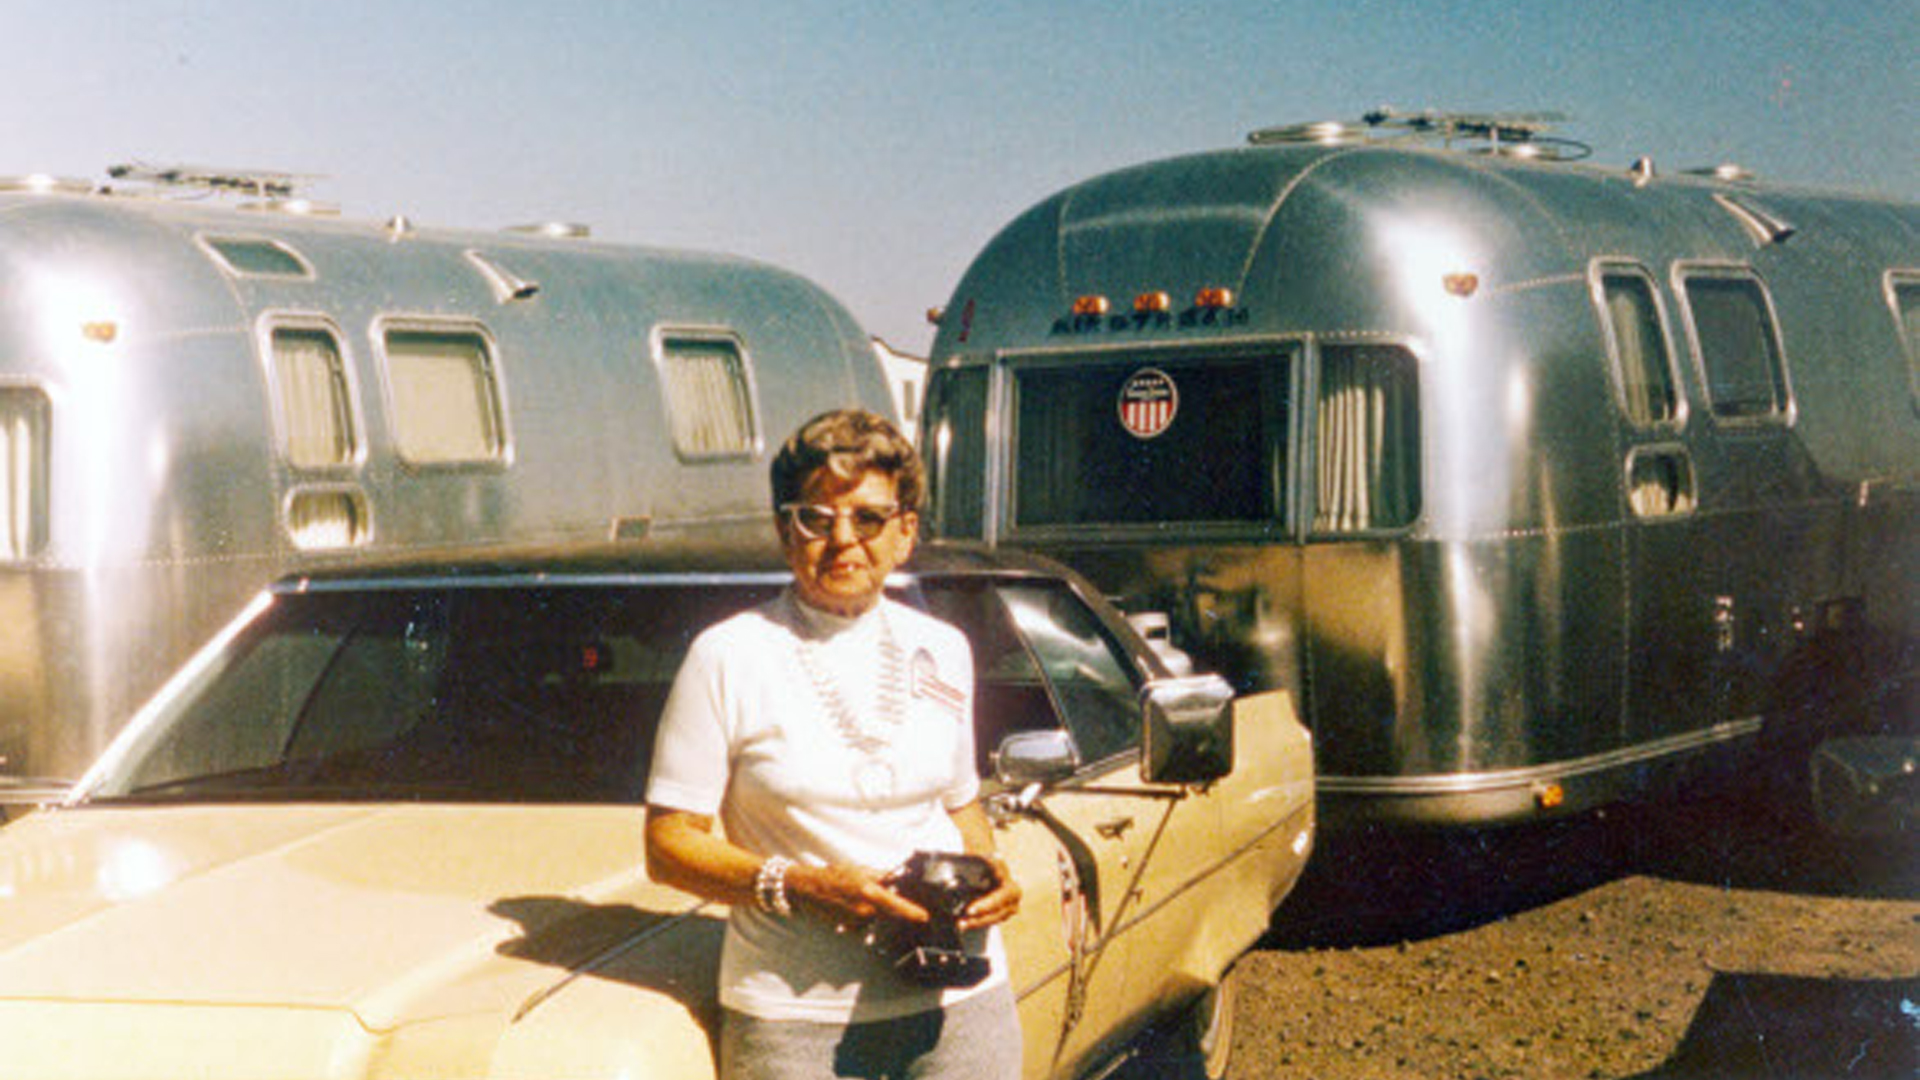 Helen Byam smiling for a picture next to two Airstream travel trailers and a white car